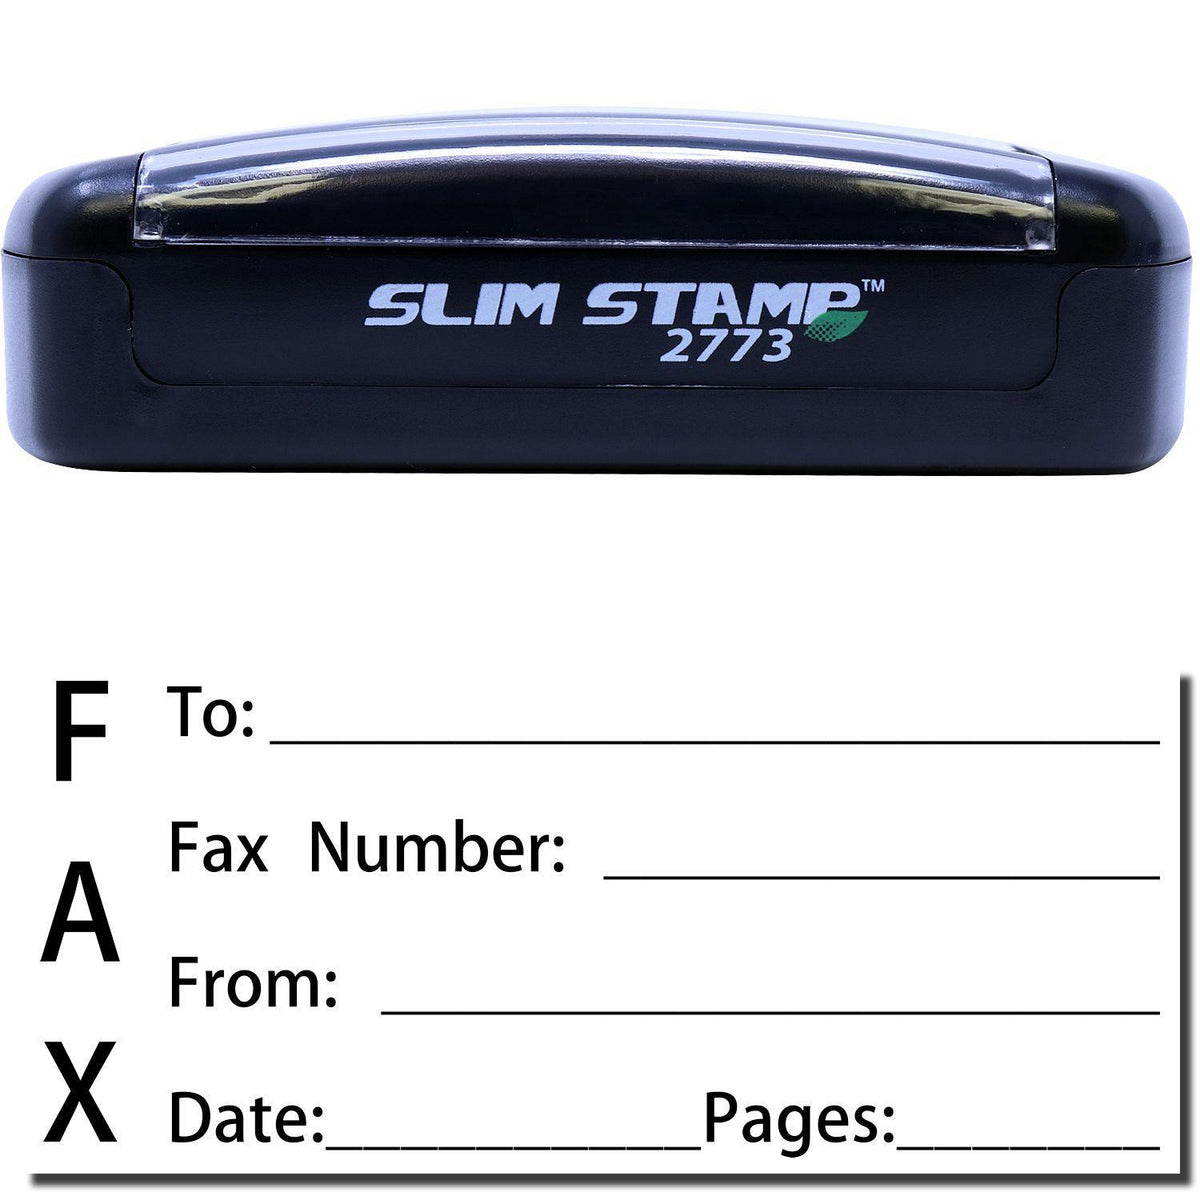 A stock office pre-inked stamp with a stamped image showing how the text &quot;FAX&quot; is displayed vertically with a form for filling in details of fax like whom the fax is being sent to, fax number, who is sending the fax, date, and number of pages is shown after stamping from it.